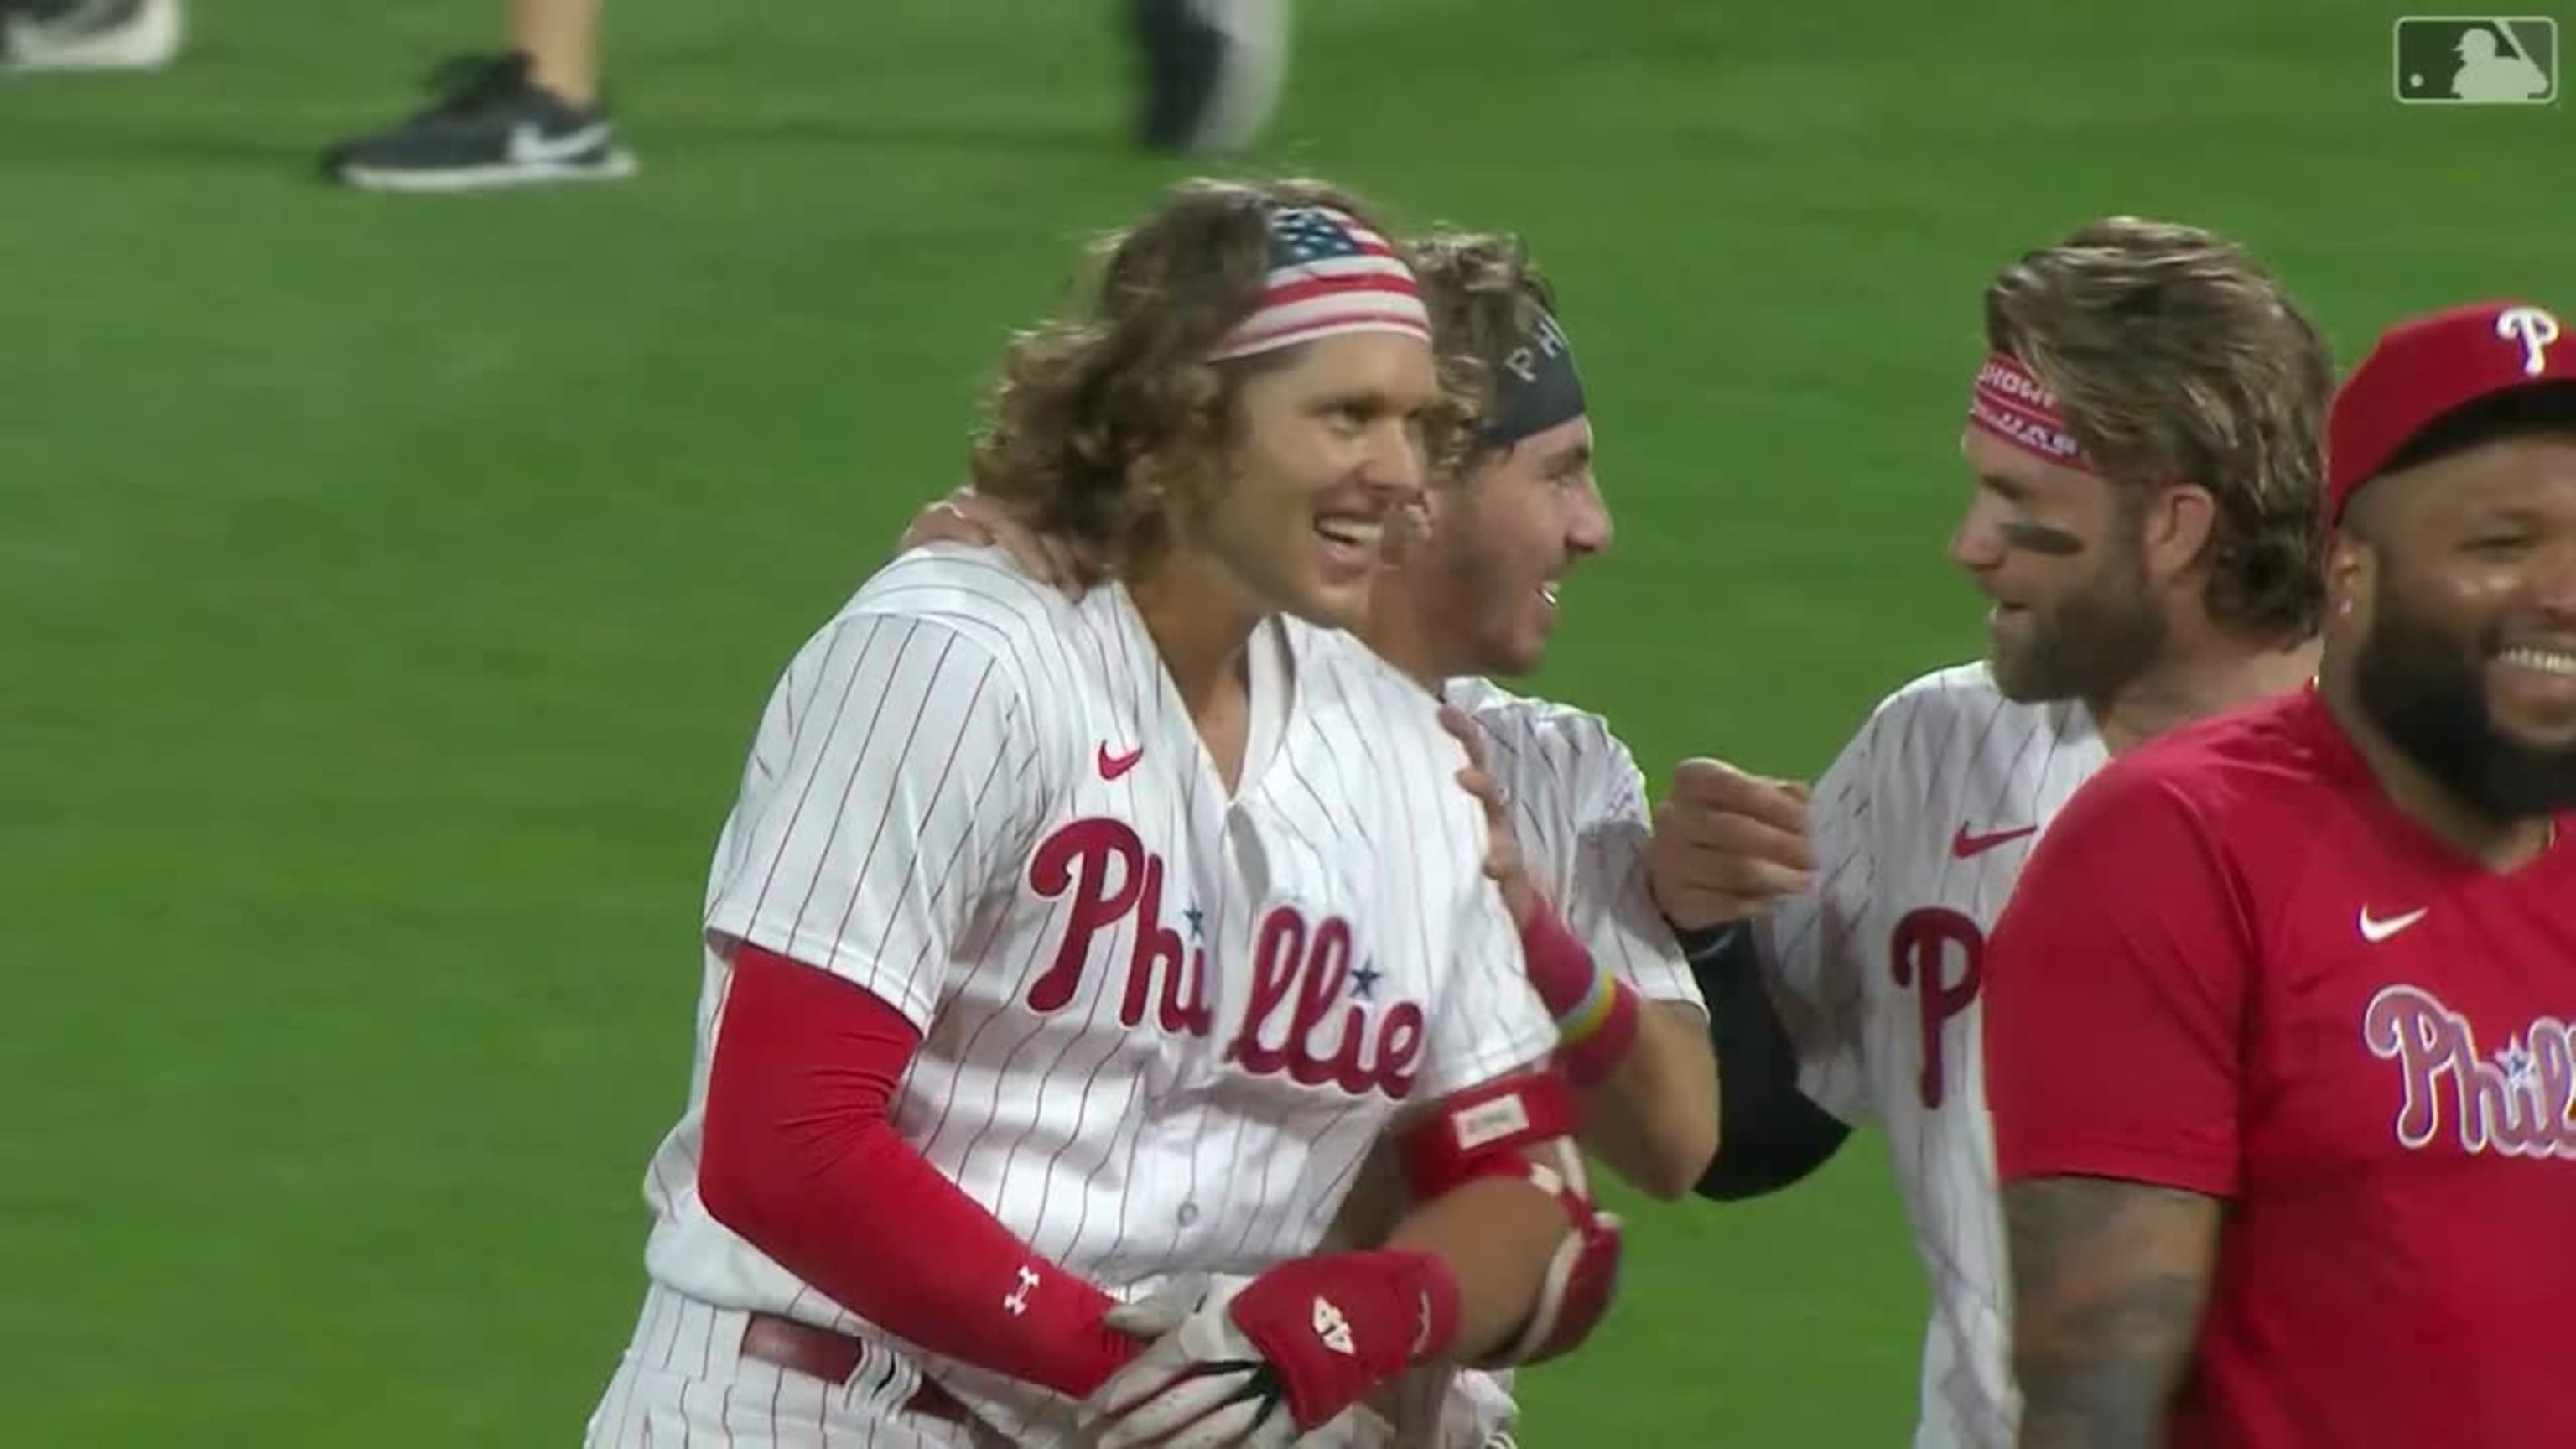 WATCH ALEC BOHM'S WALKOFF WINNER FOR PHILS OVER O'S! Fast Philly Sports